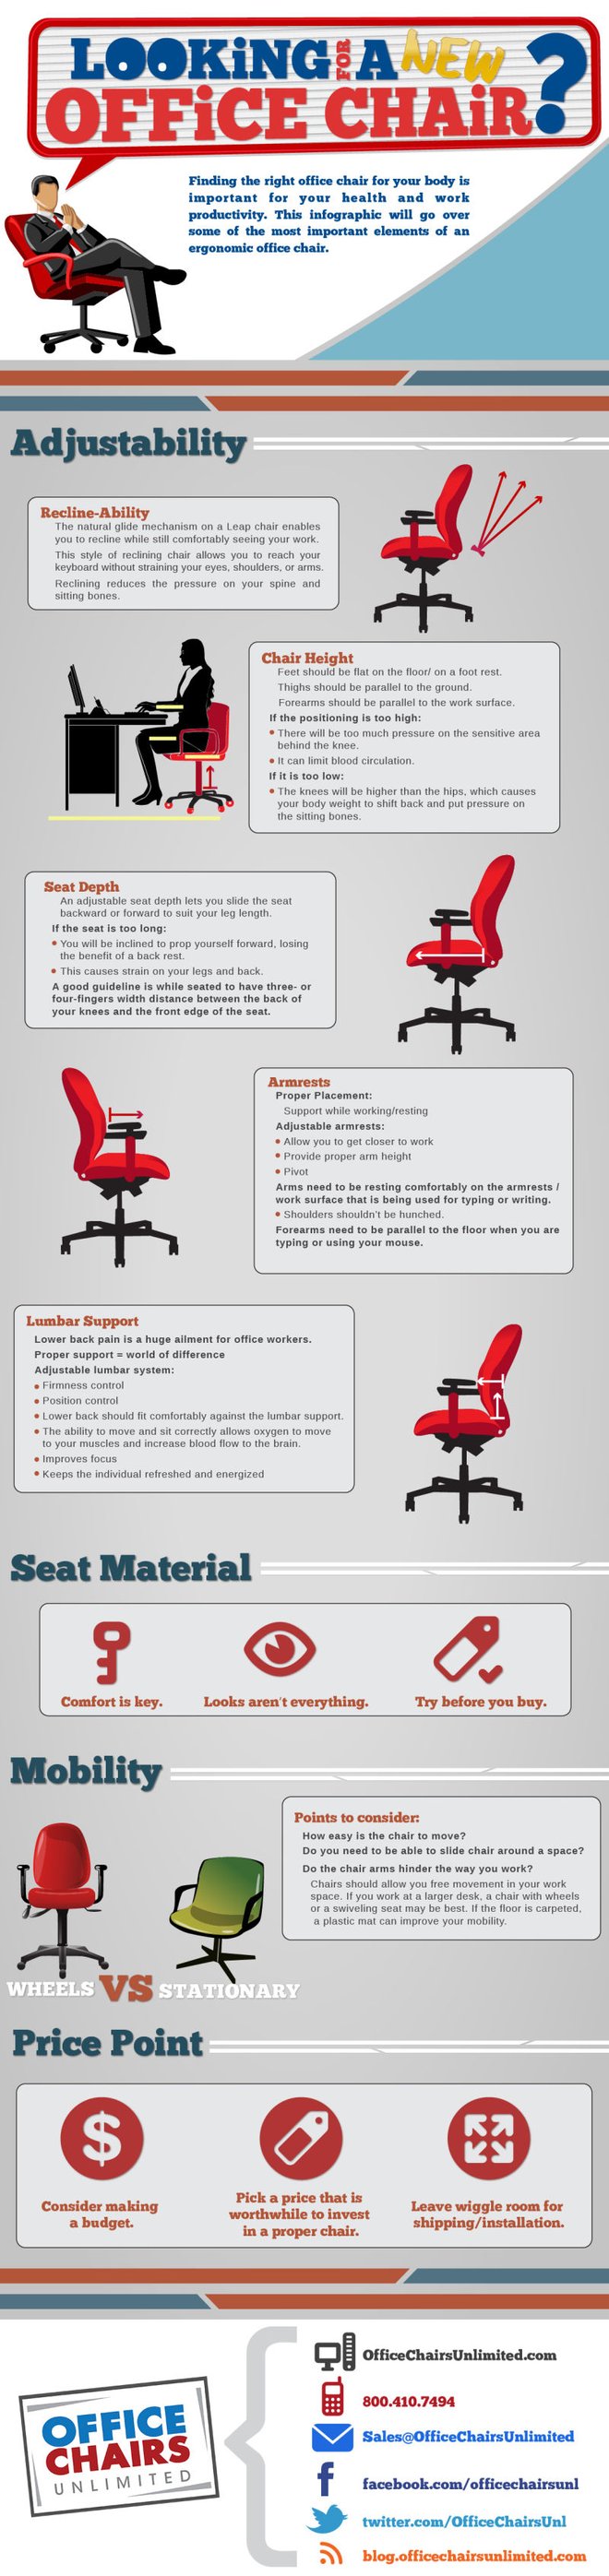 how to pick an office chair.jpg